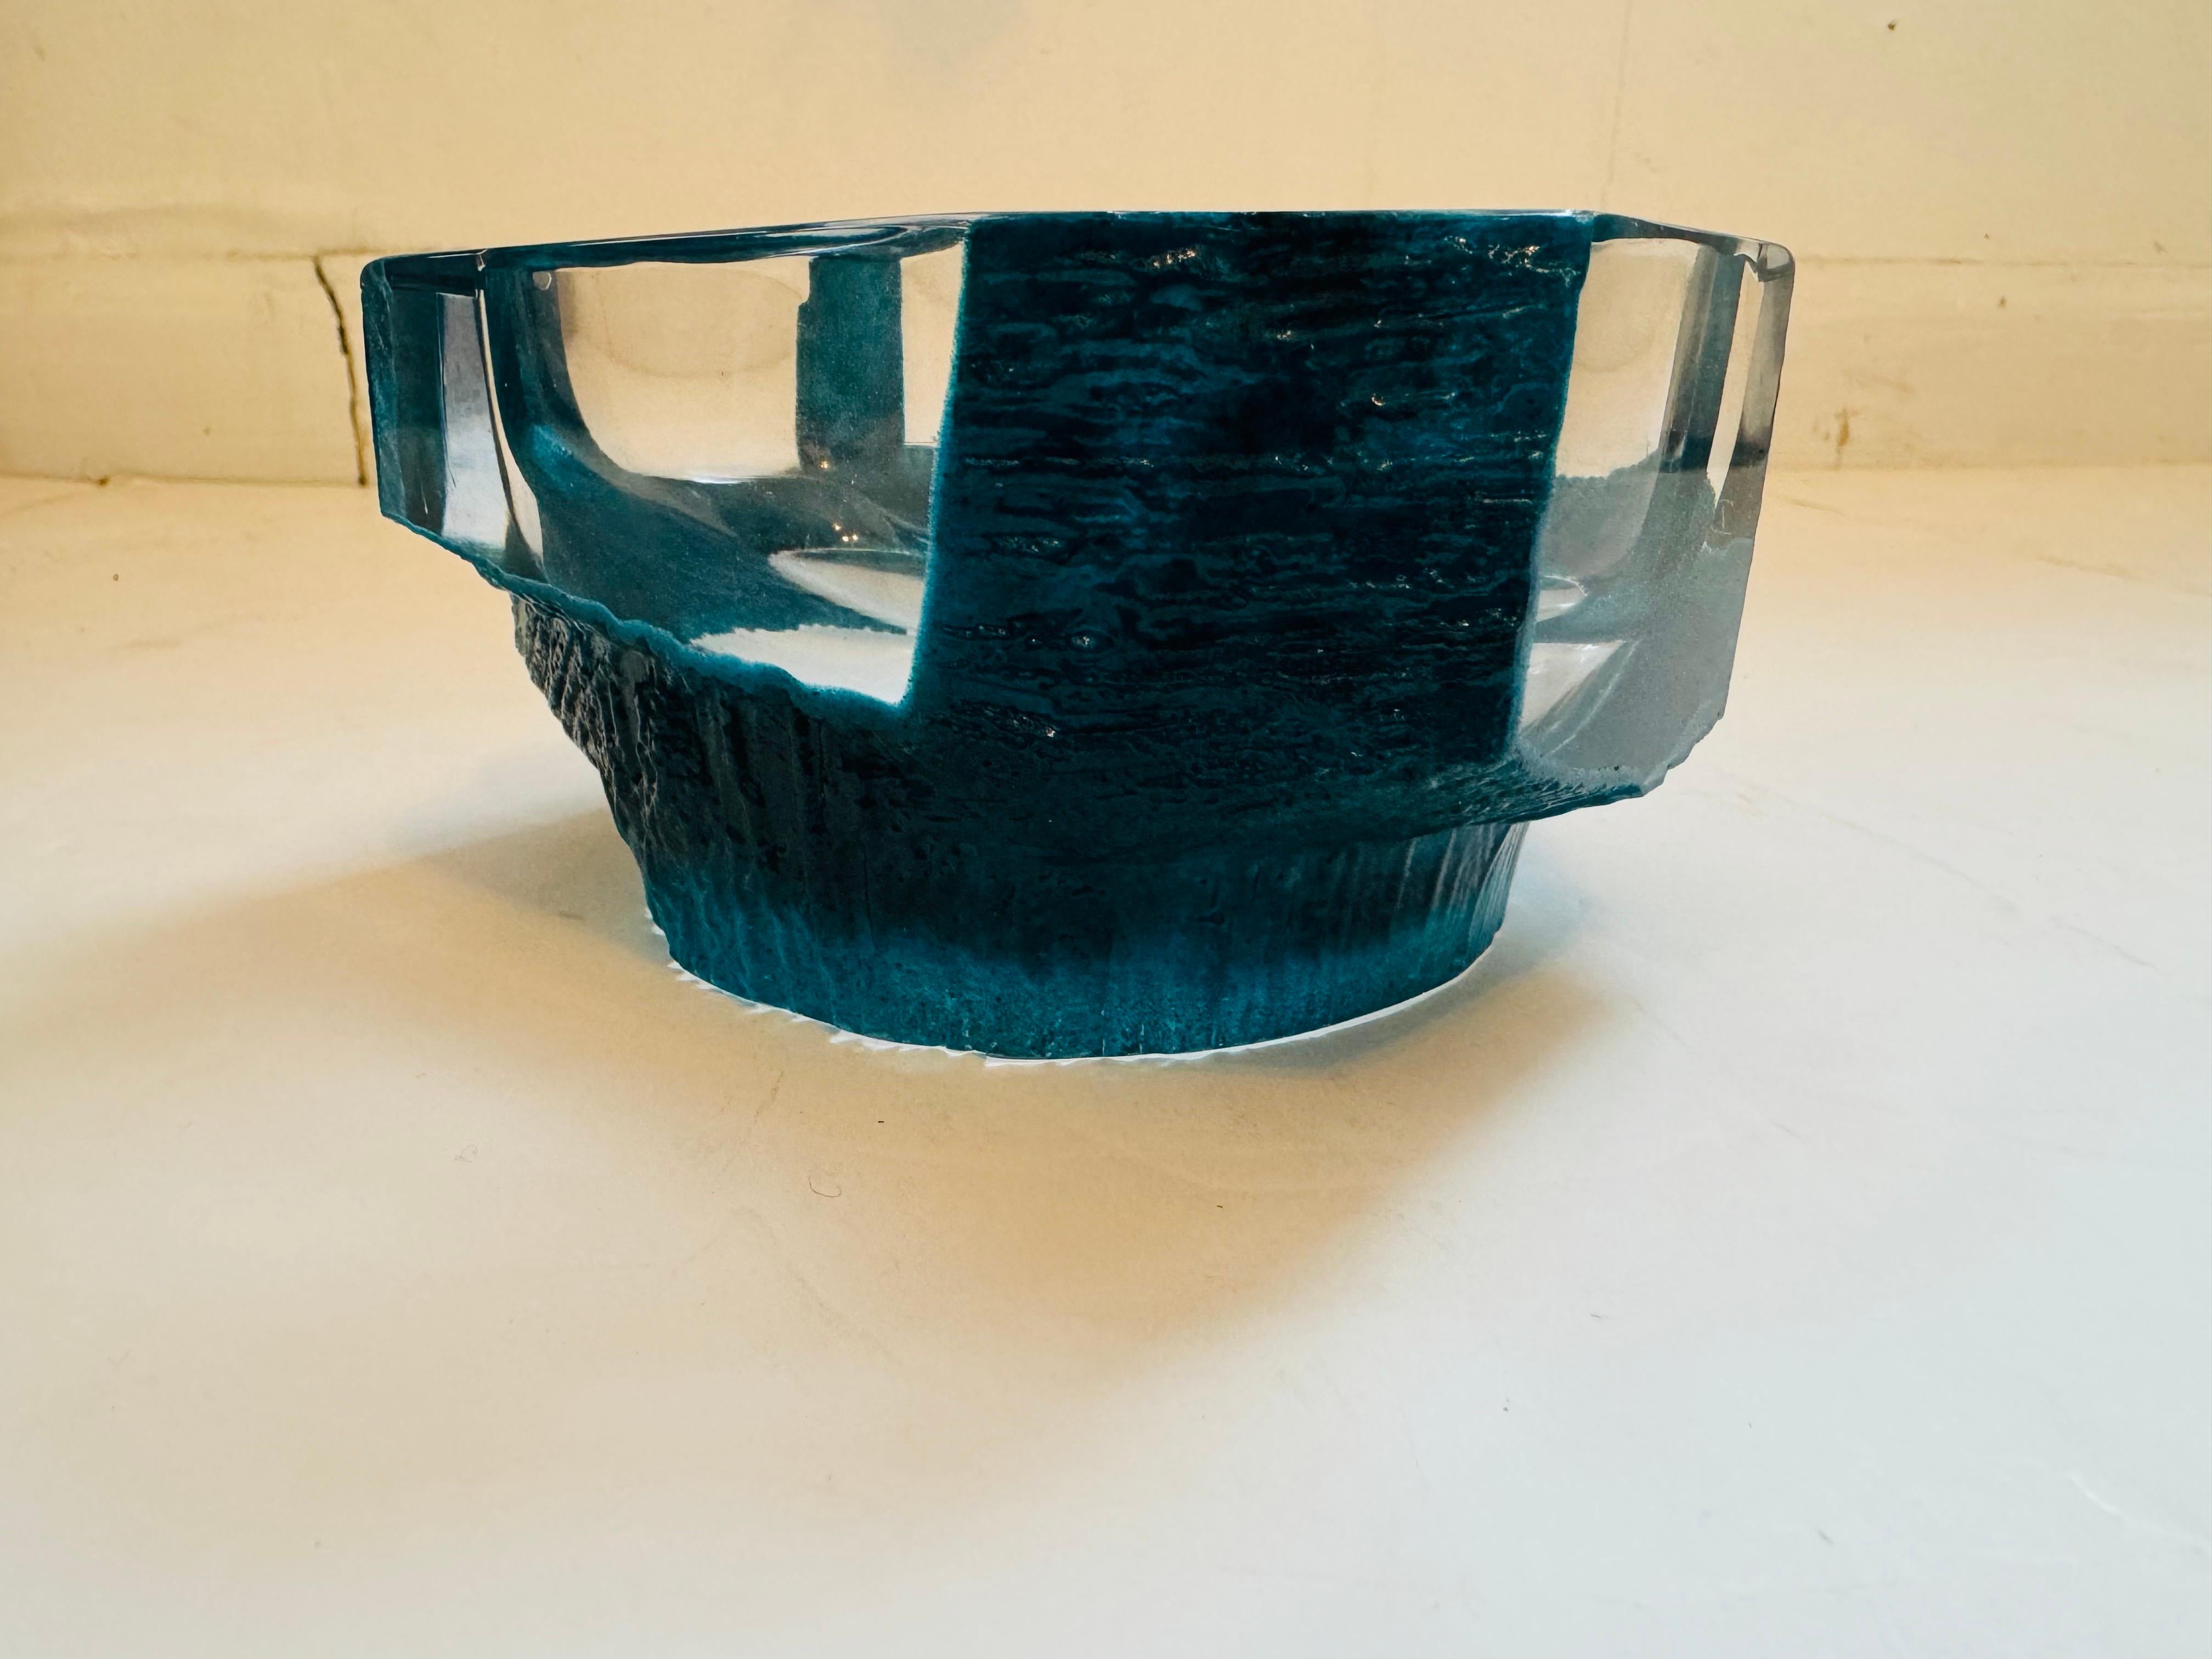 A rare French brutalist crystal bowl in blue green /turquoise coloring designed be famed French artist, Cesar Baldaccini for Daum.

Biography:
César was a French sculptor and member of the Nouveau Réalisme movement, best known for his use of